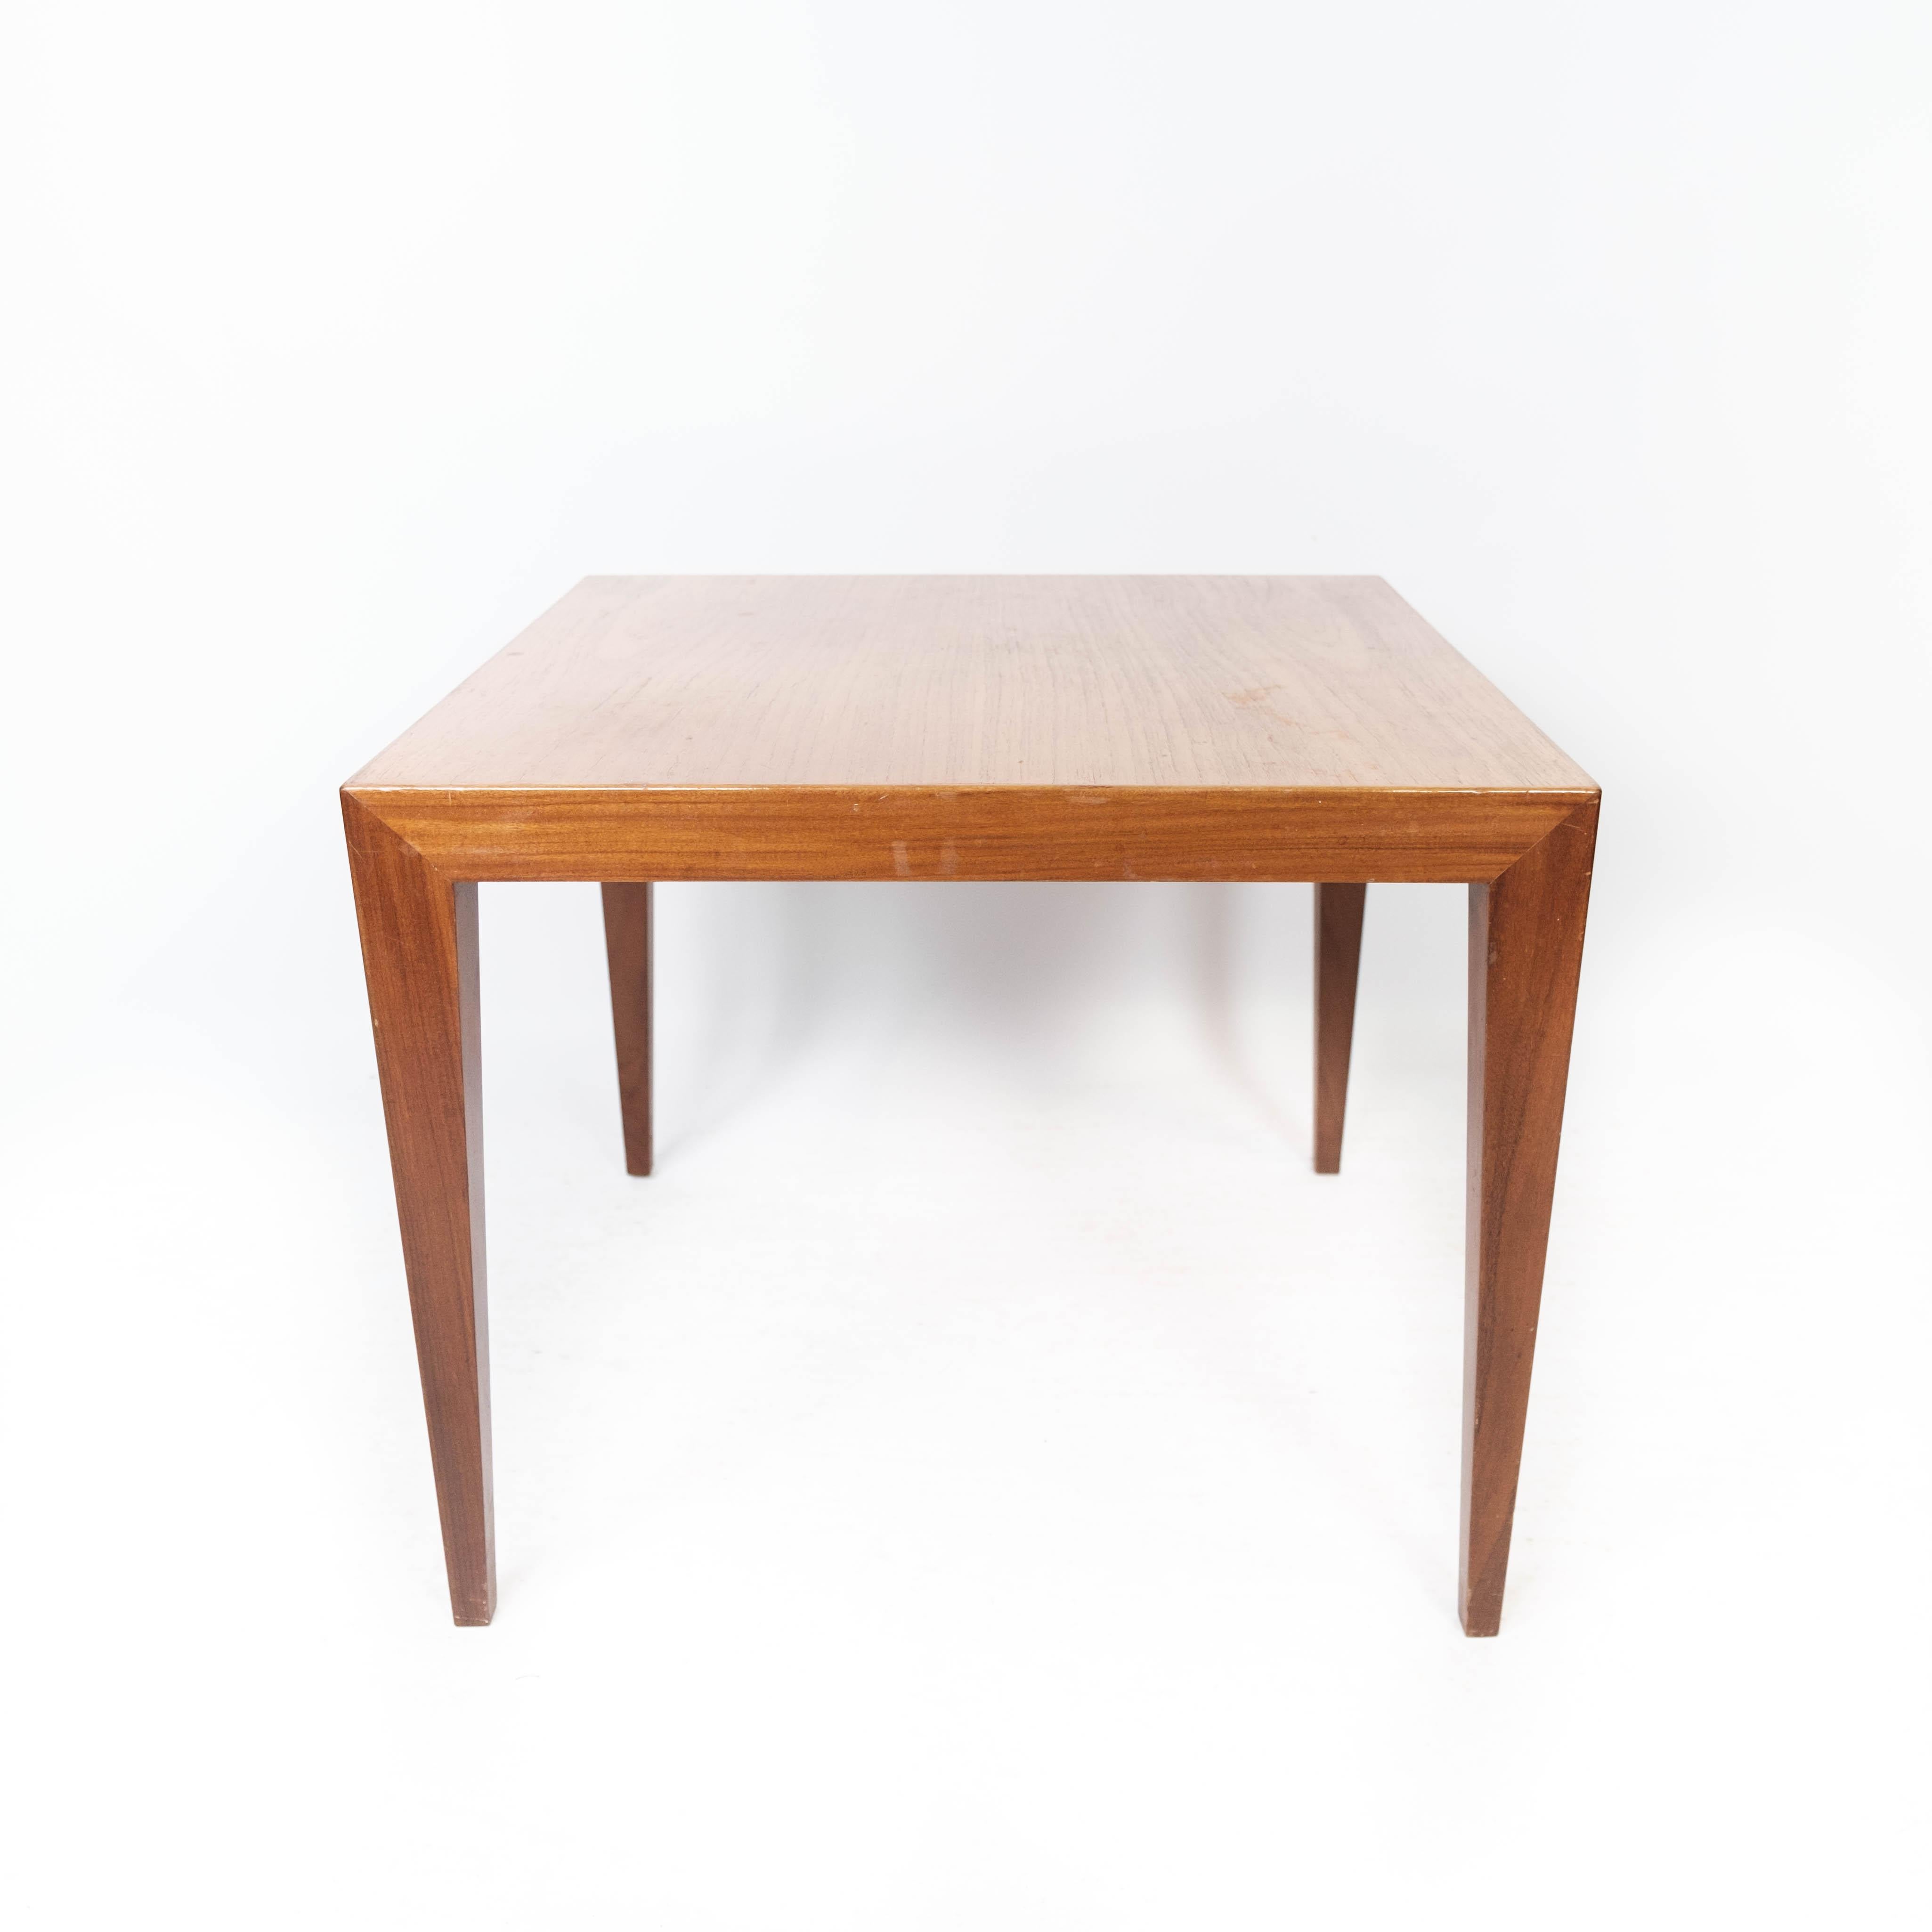 Side table in teak of Danish design manufactured by Haslev Furniture in the 1960s. The table is in great vintage condition.